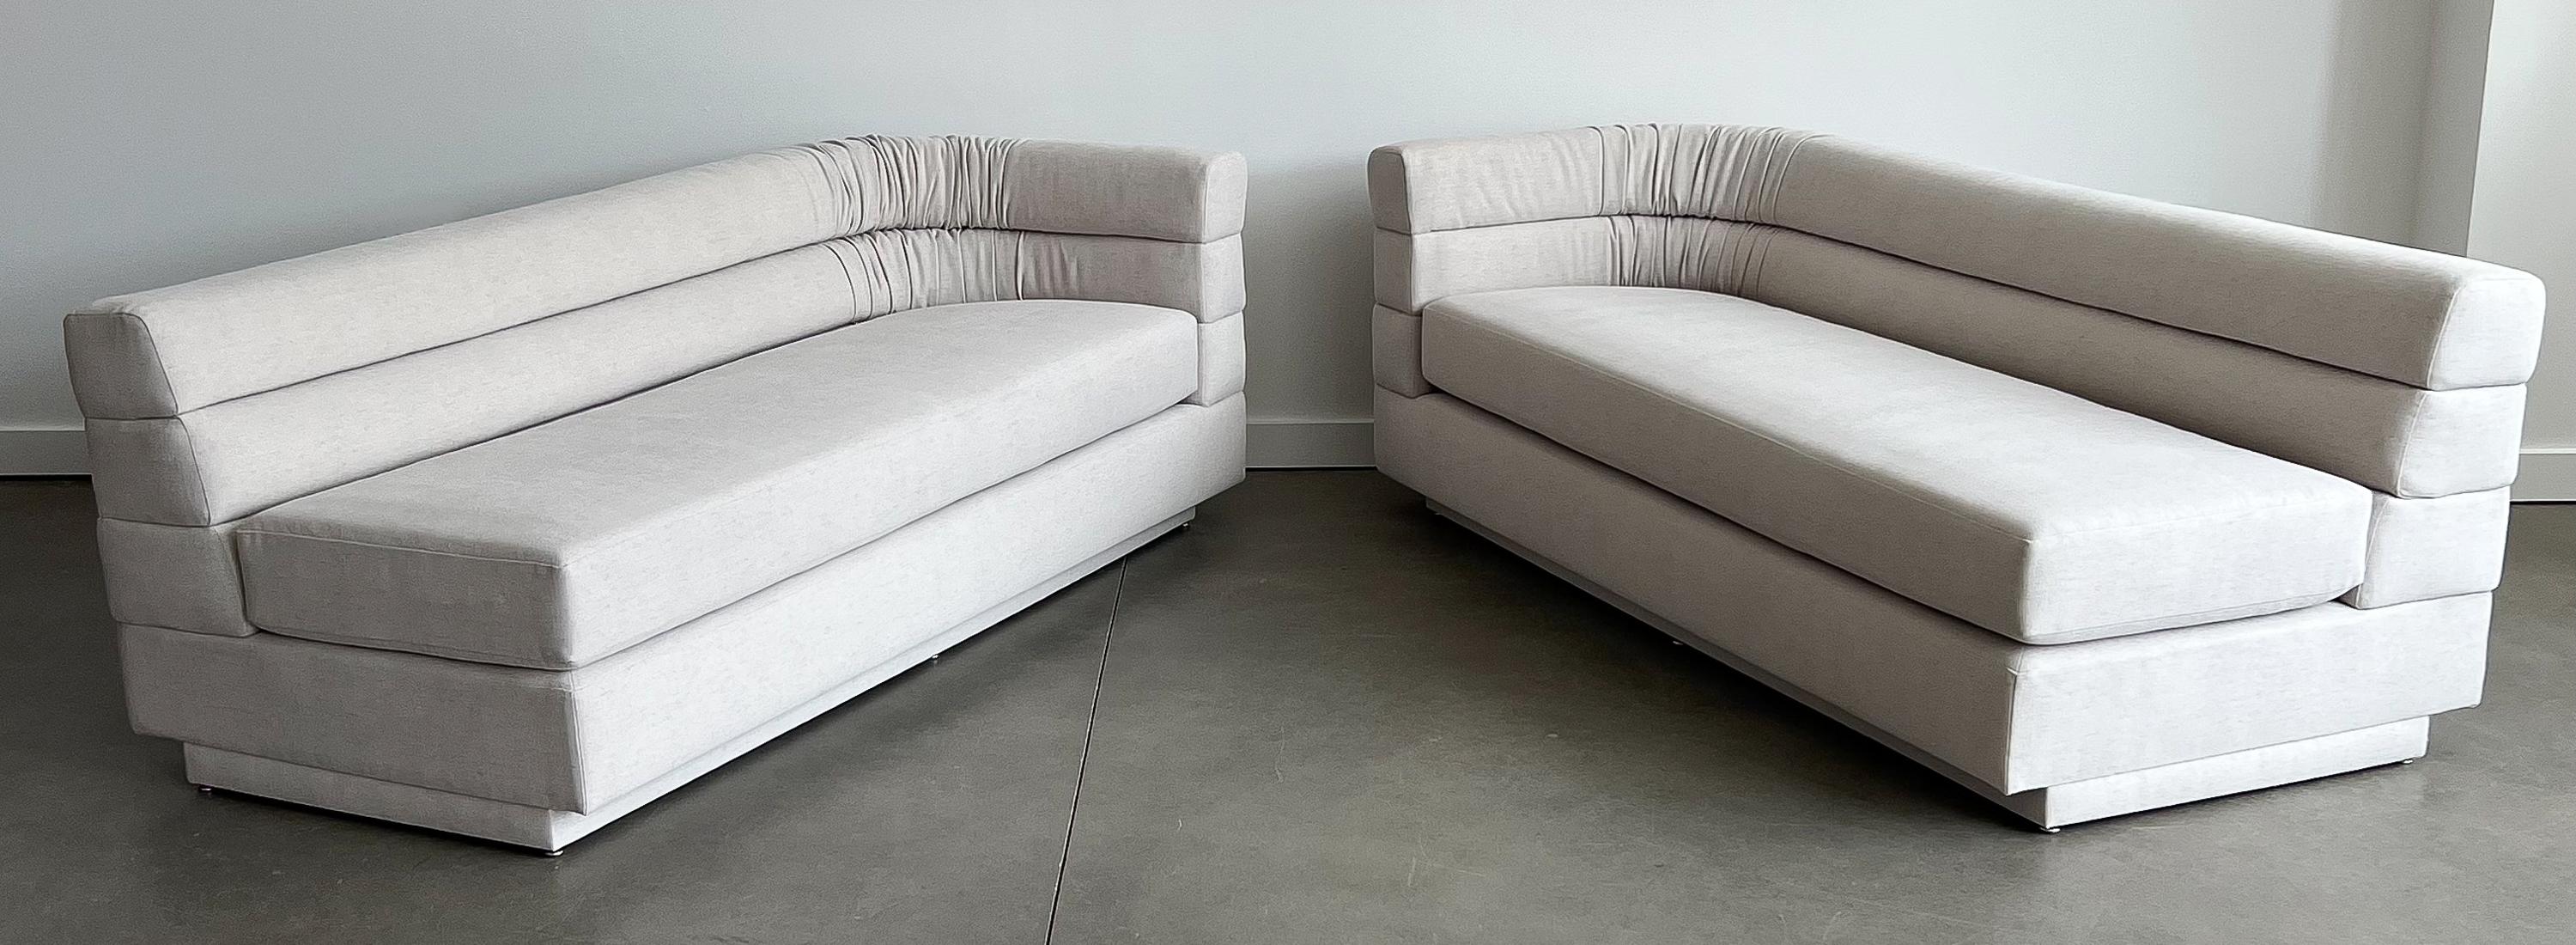 Interior Crafts Channeled Back Two Piece Sofa by Richard Himmel 3